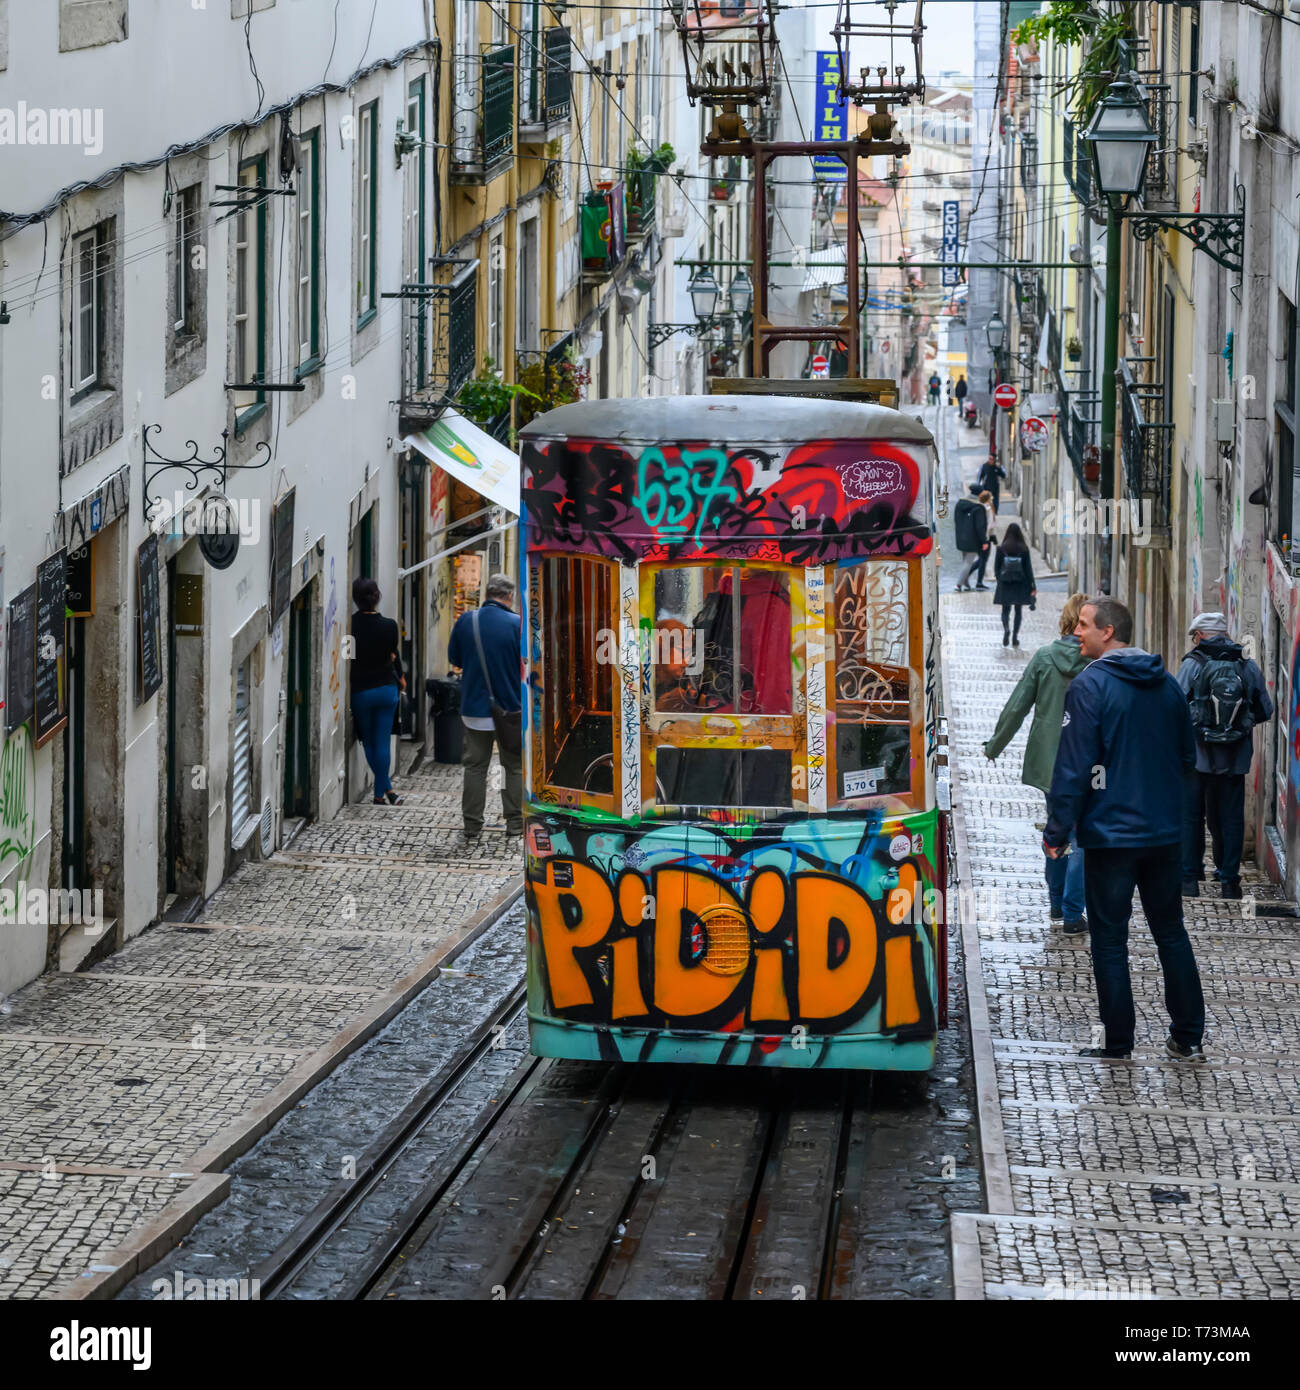 Street car with graffiti going downhill on a sloped street with pedestrians and residential buildings; Lisbon, Lisboa Region, Portugal Stock Photo